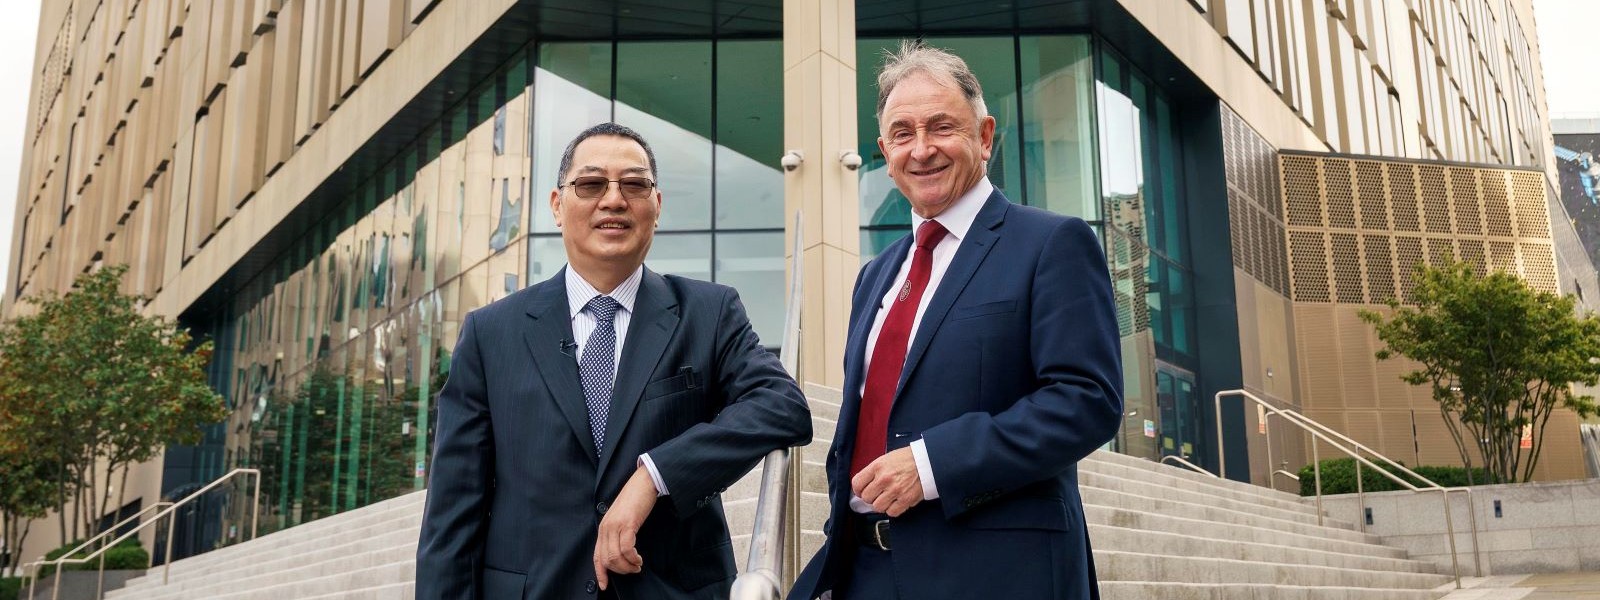 Dr Charles Huang and Professor Sir Jim McDonald on the steps of the Technology & innovation Centre